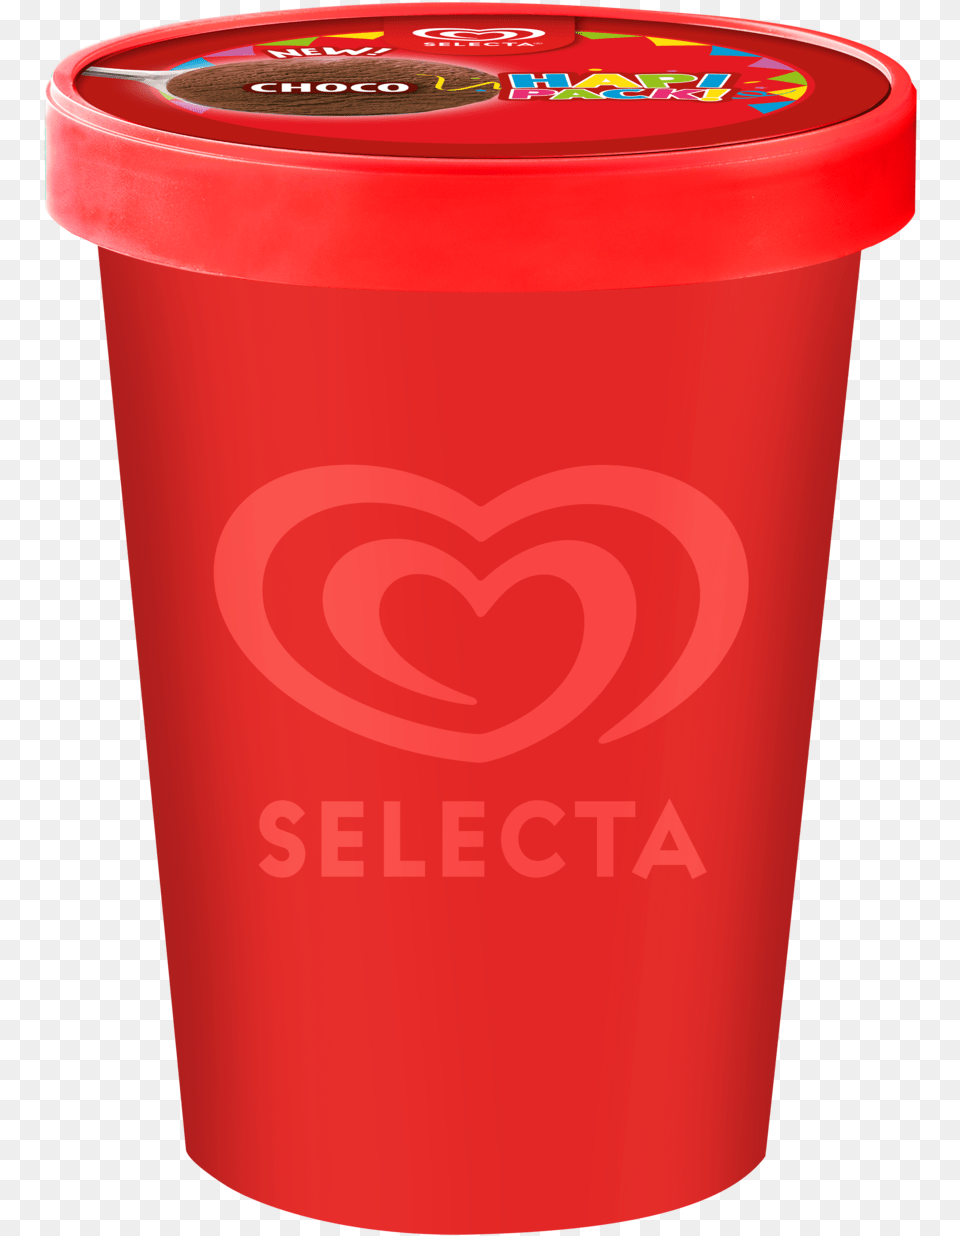 Selecta Birthday Hapi Pack Choco Ice Cream, Cup, Bottle, Shaker Png